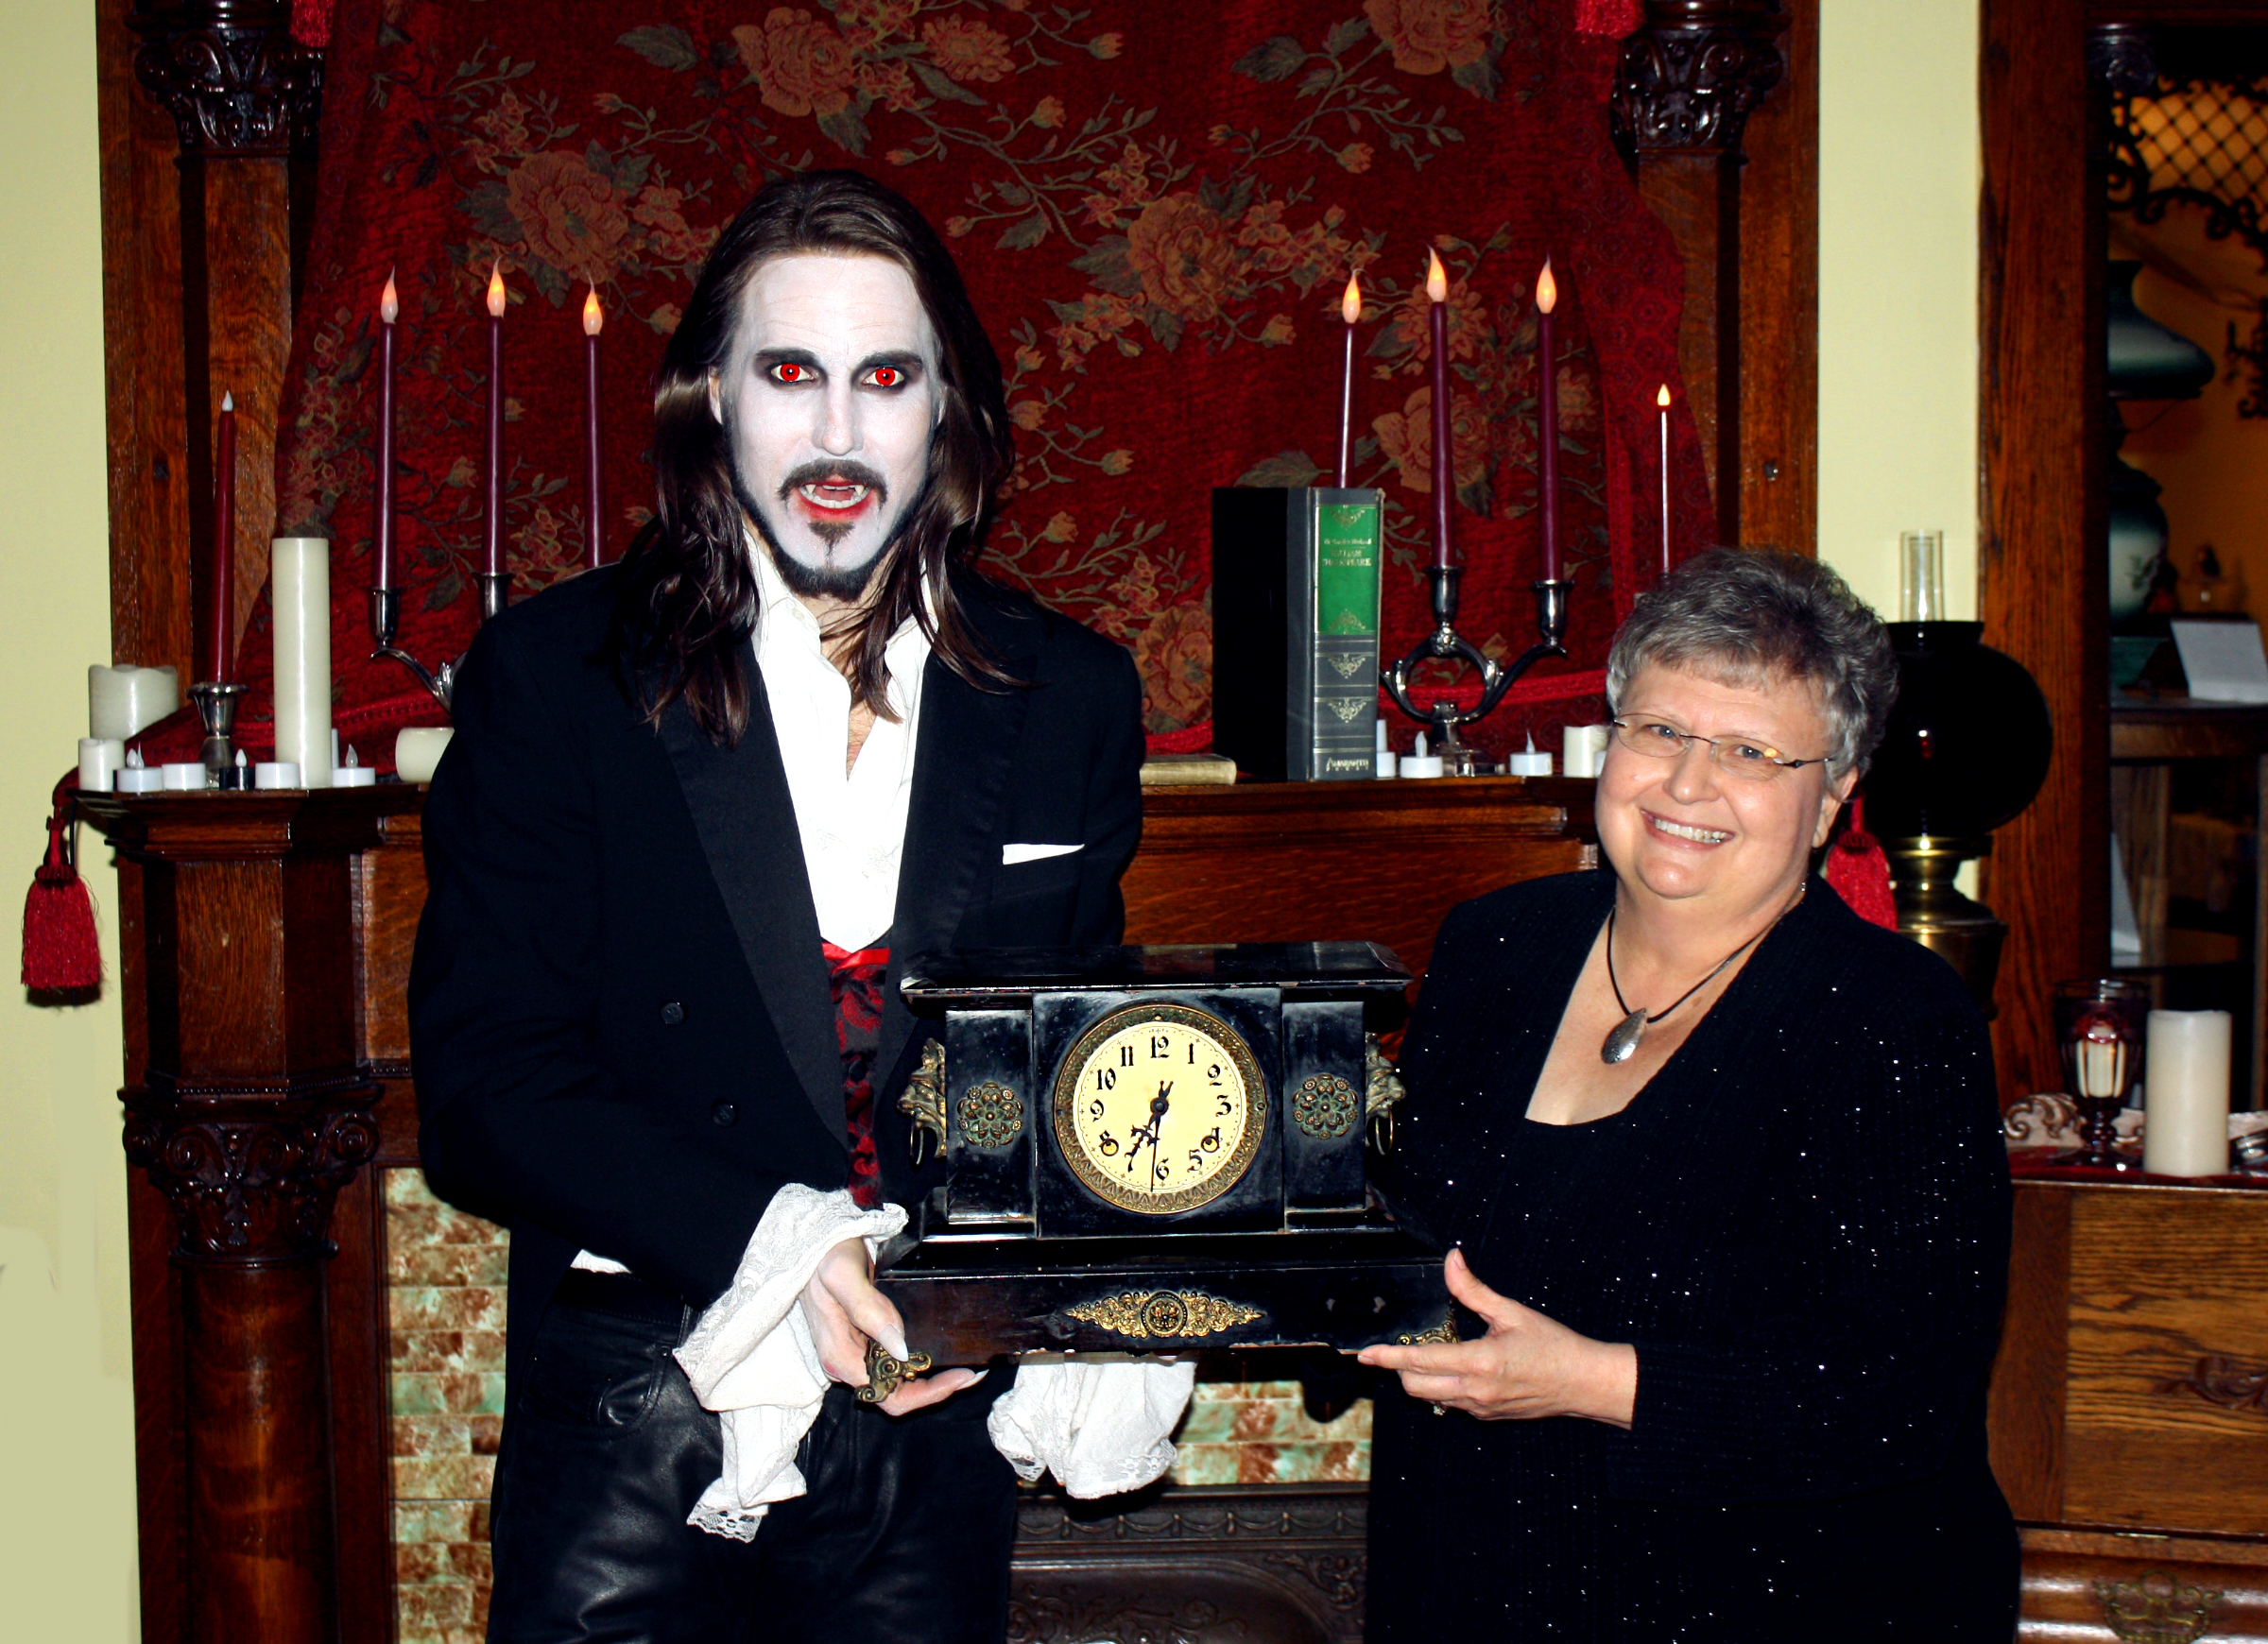 MATT WIGGINS (in DRACULA make-up) is presented a historic mantel clock from the a Board Member for the Randleman House historic home in Carlise, IA, which was selected as one of the locations used for Matt's hit live production of Bram Stokers DRACULA.